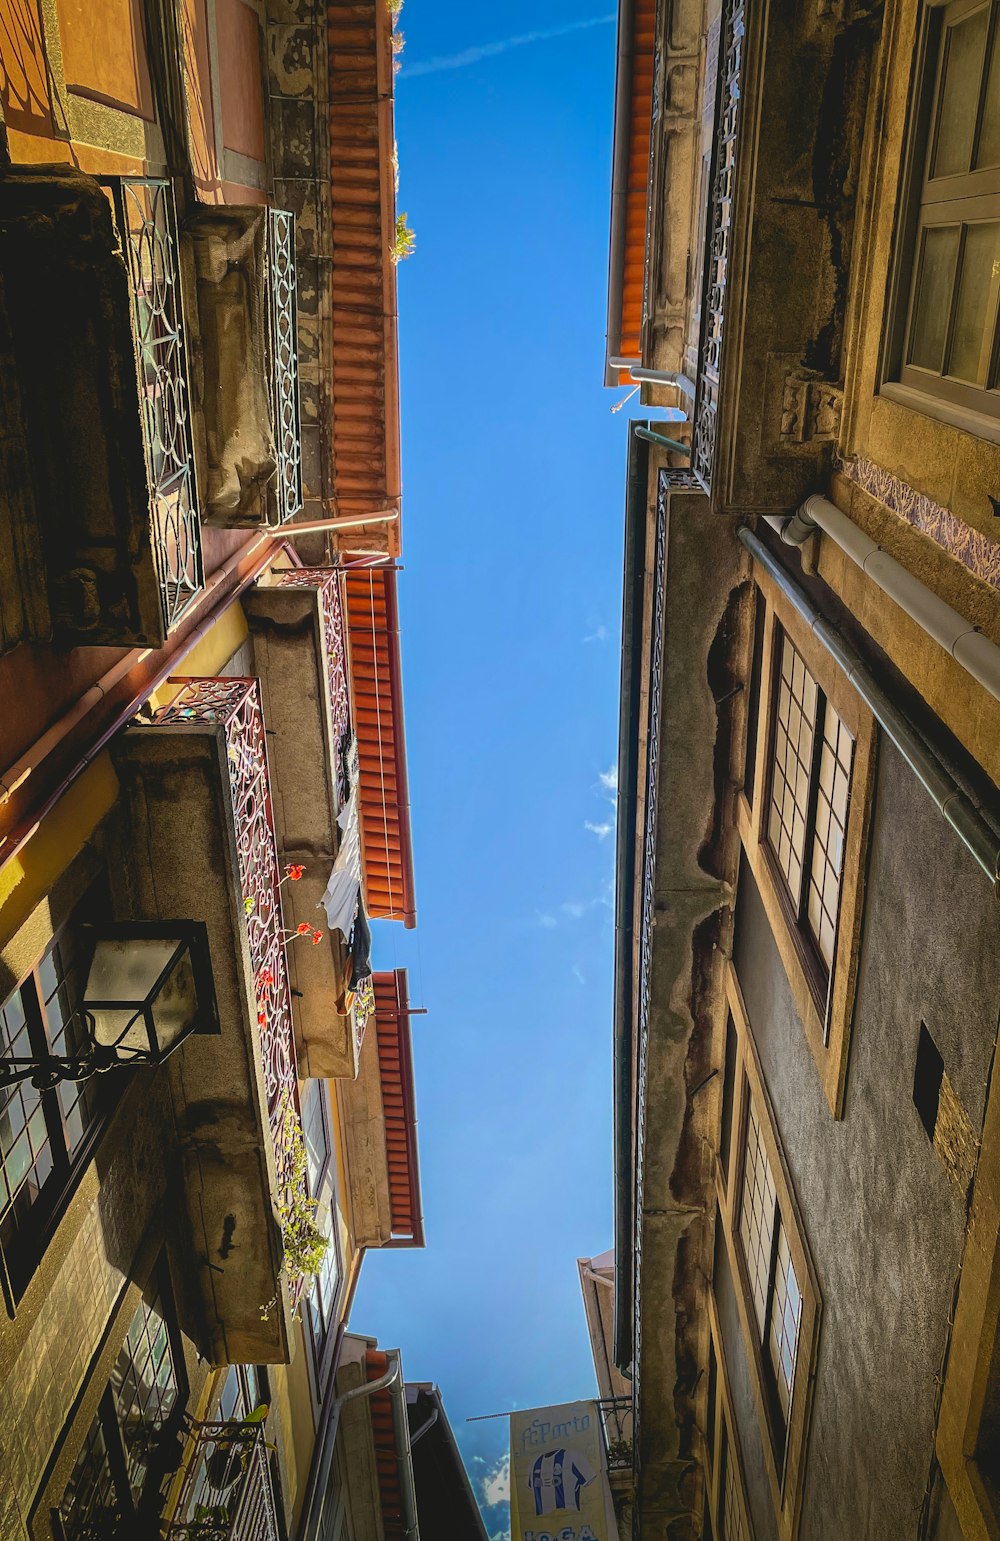 a narrow alley way with a blue sky in the background